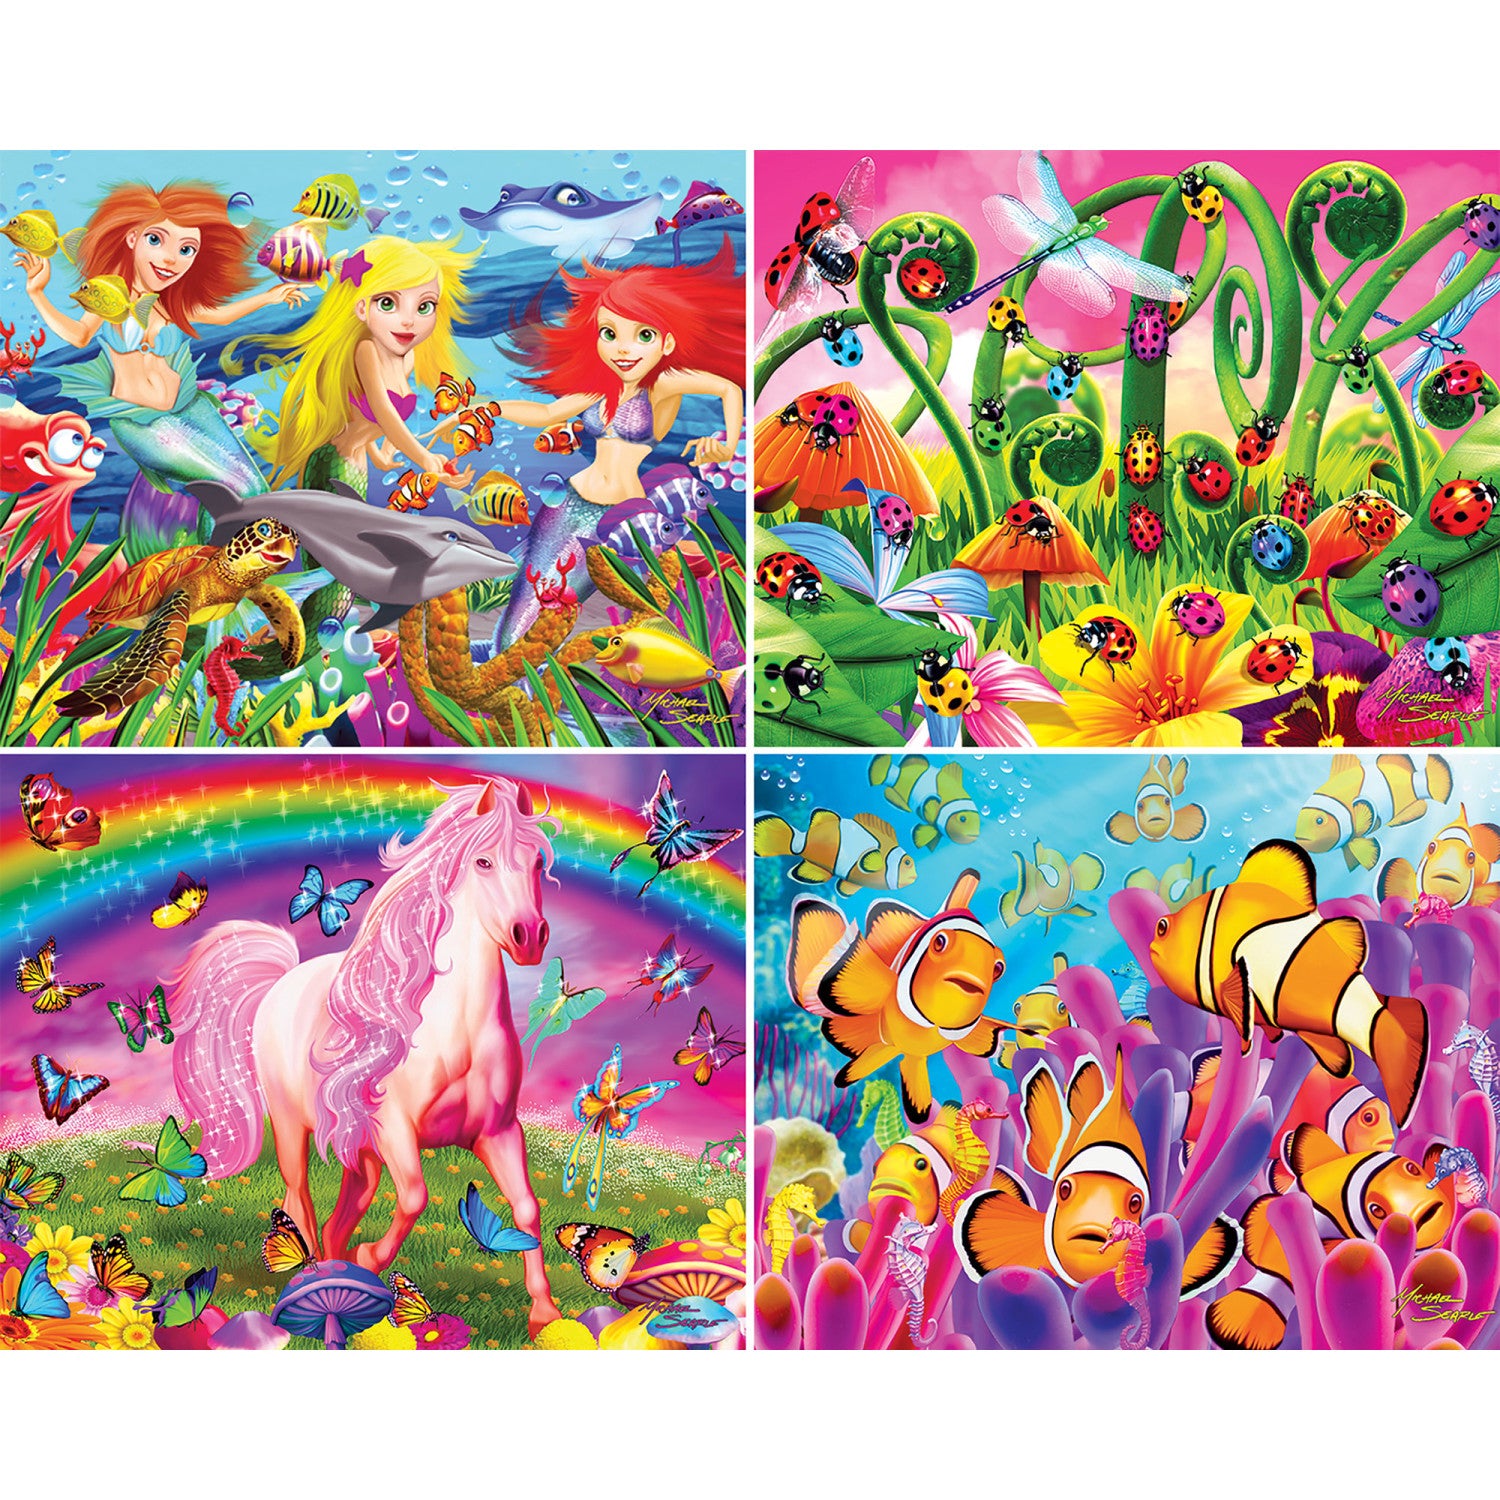 Glow in the Dark - Purple 4 Pack 100 Piece Puzzles